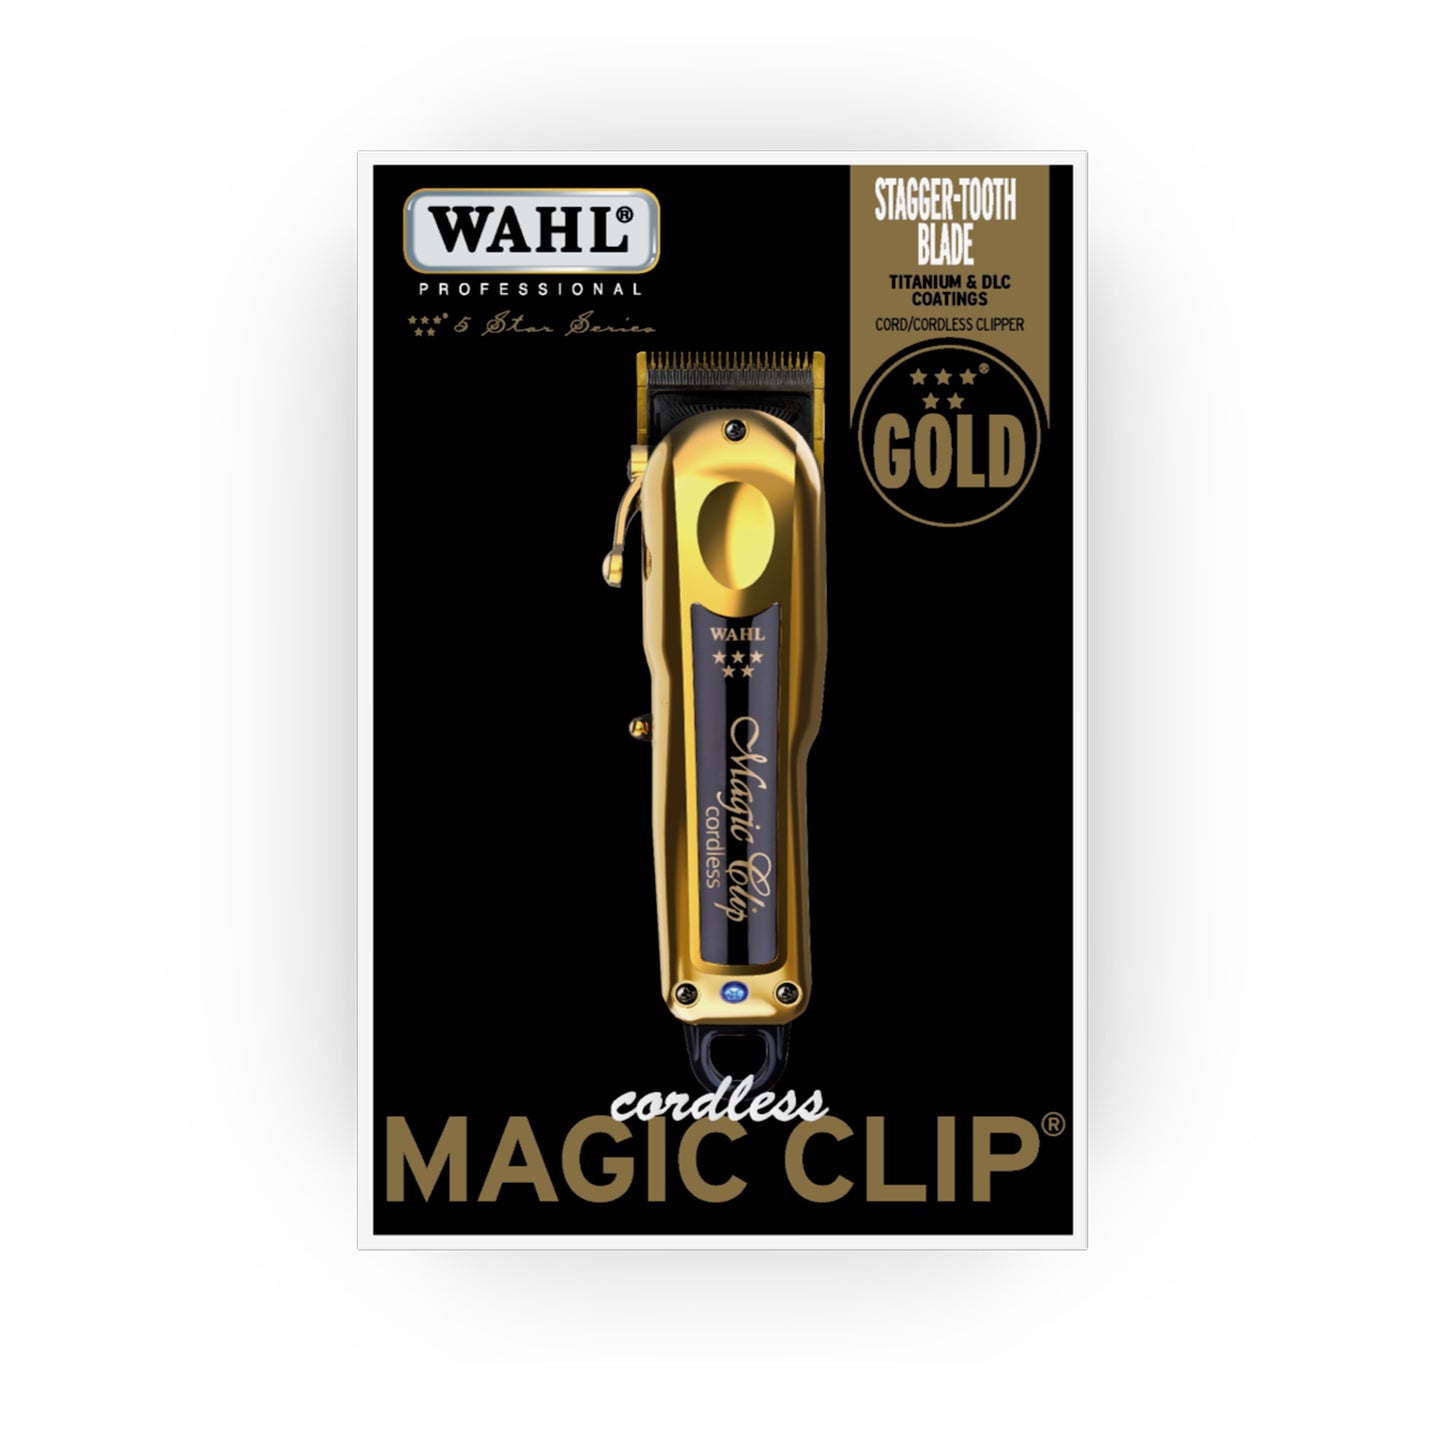 Wahl 5-Star Magic Clip Gold Limited Edition Clipper